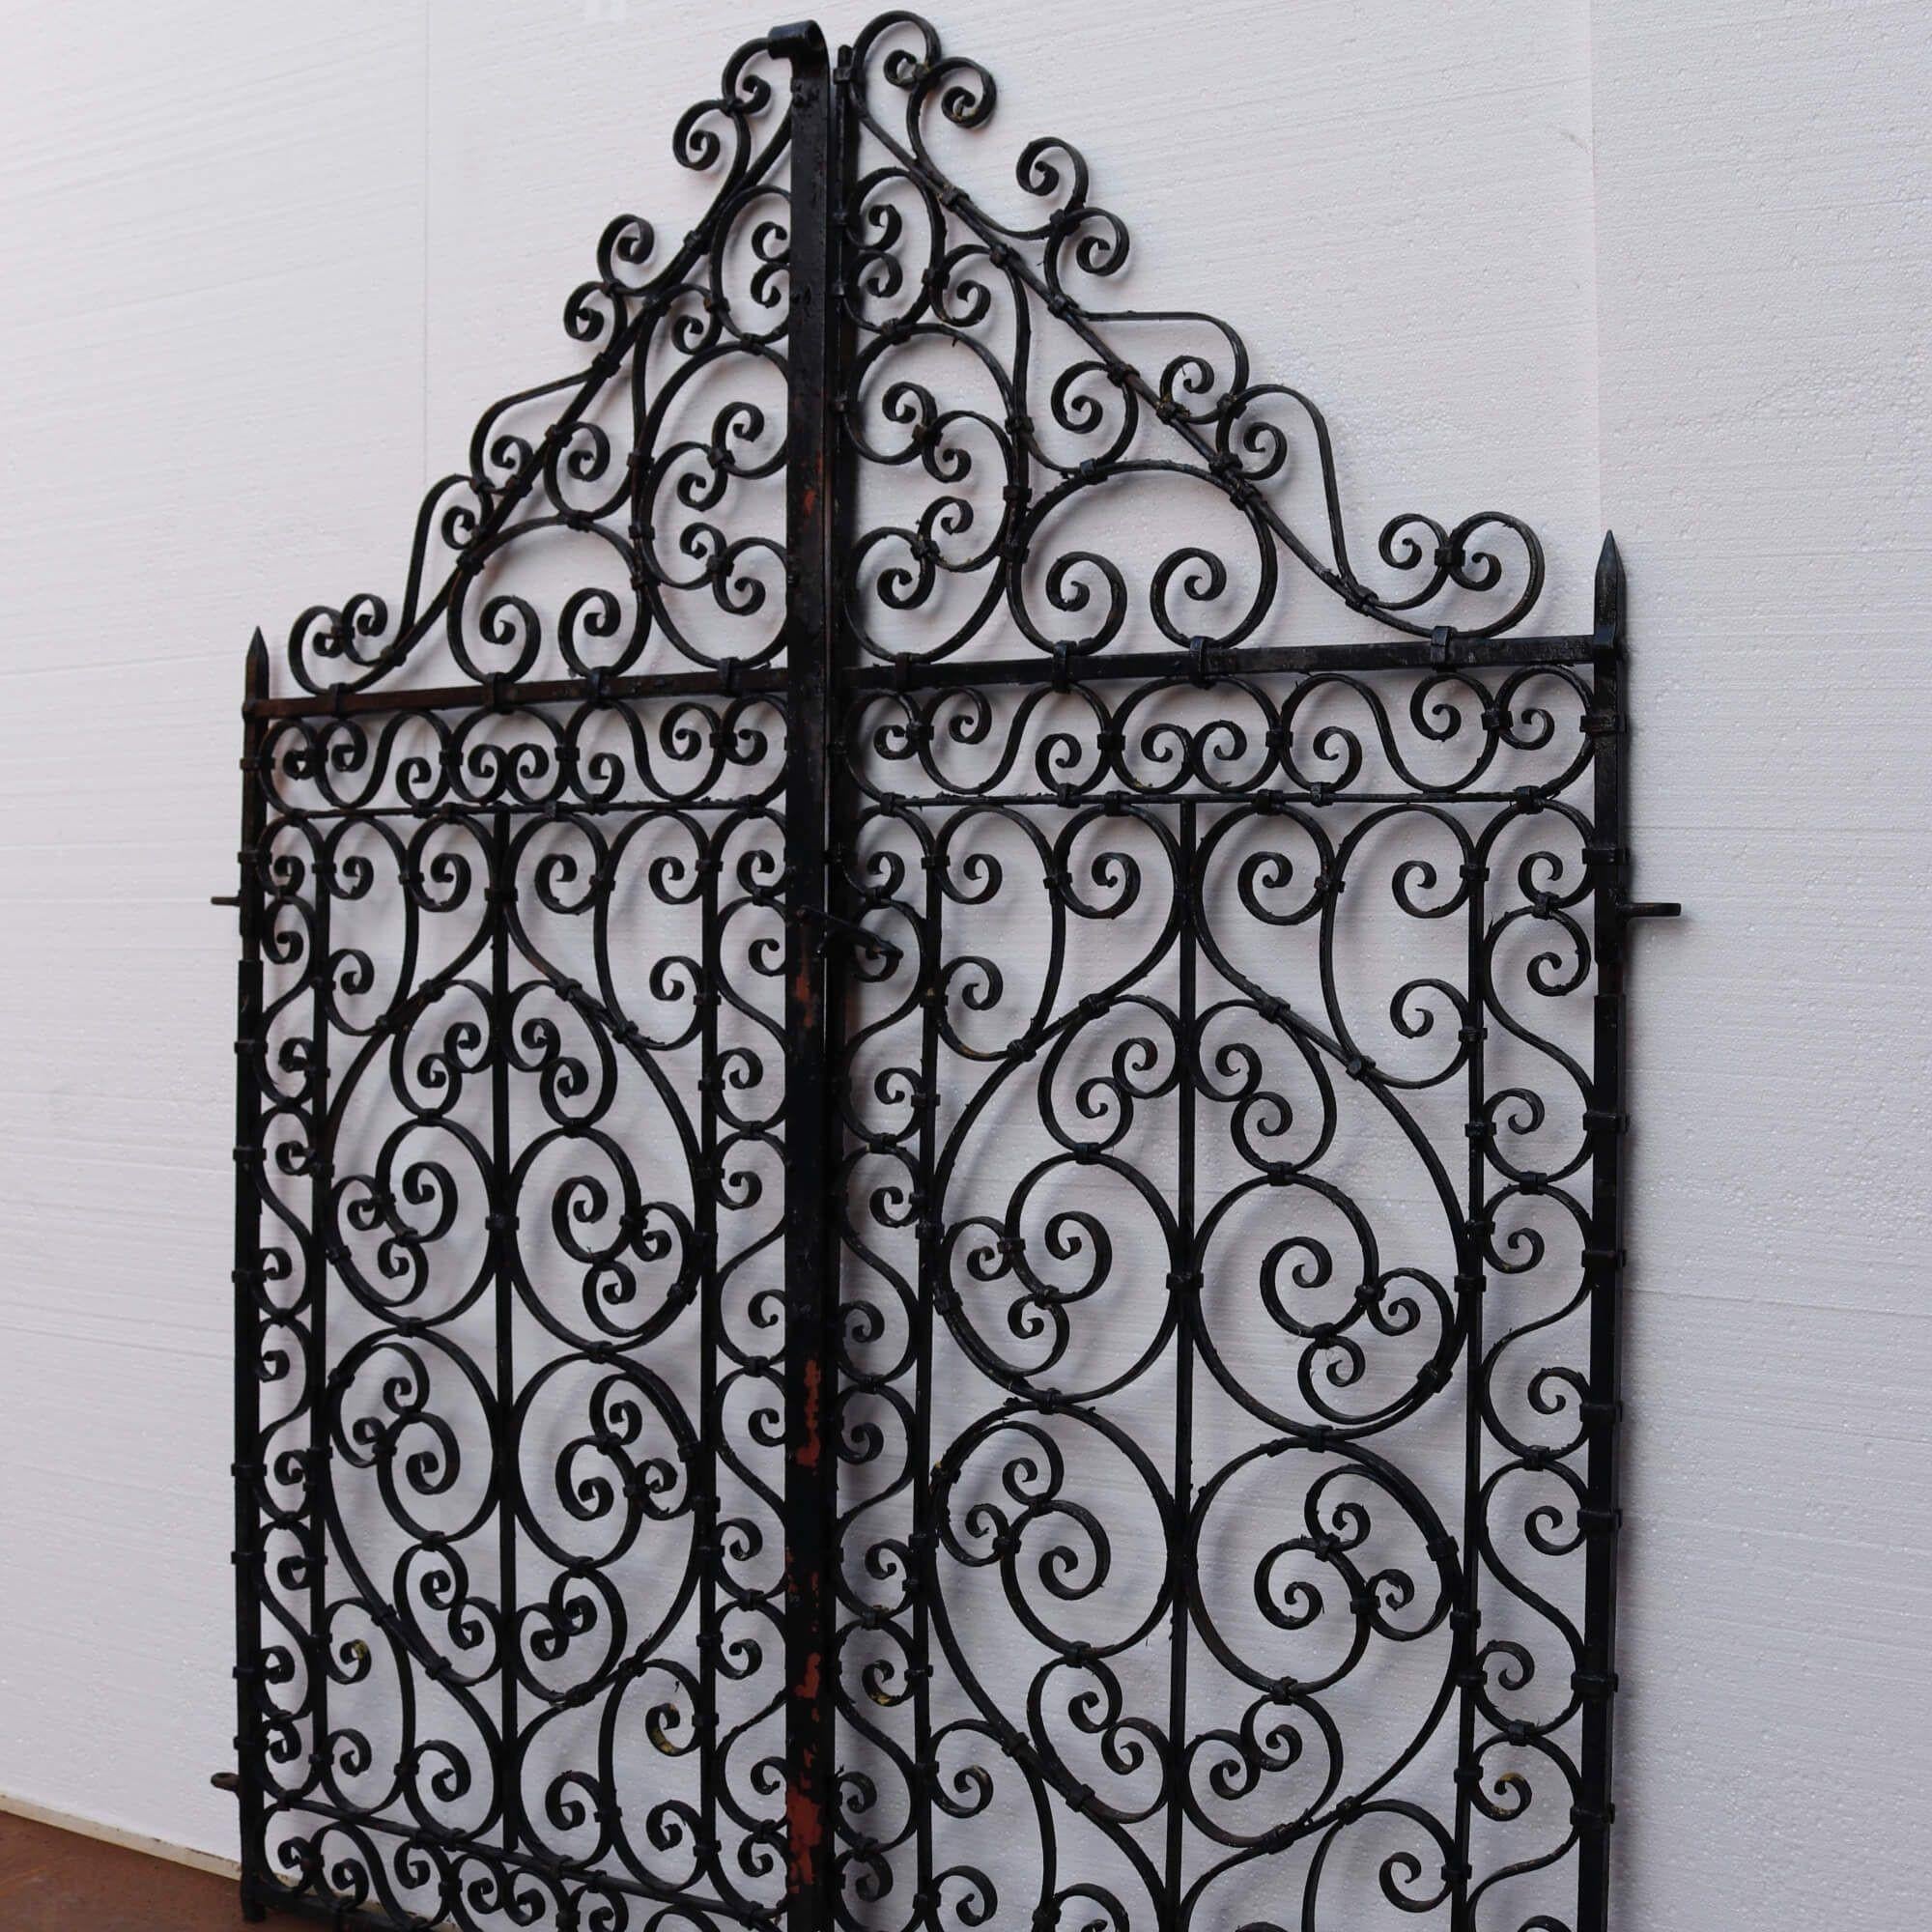 Set of Victorian Wrought Iron Scroll Pedestrian Gates In Fair Condition For Sale In Wormelow, Herefordshire